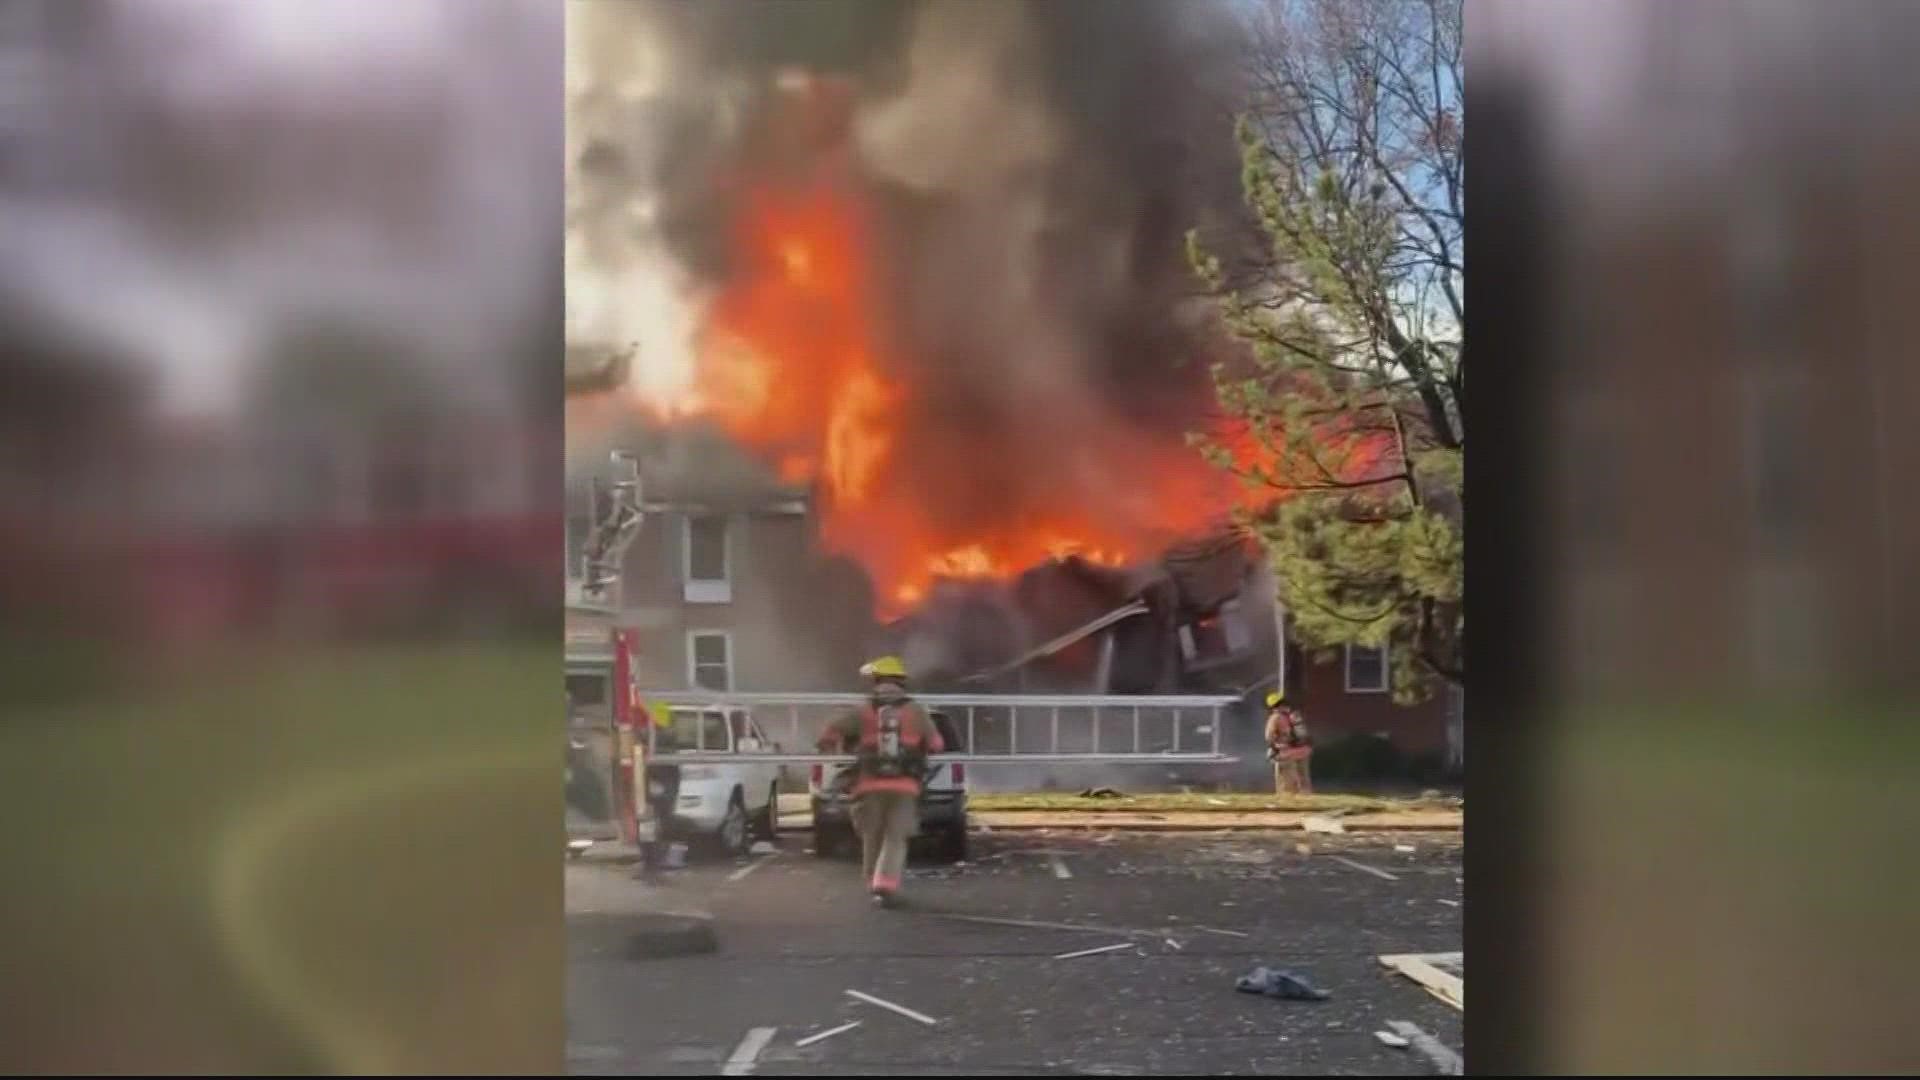 An explosion and fire at a Gaithersburg condo building Wednesday that injured 14 people is now being linked to the death by suicide of a 36-year-old